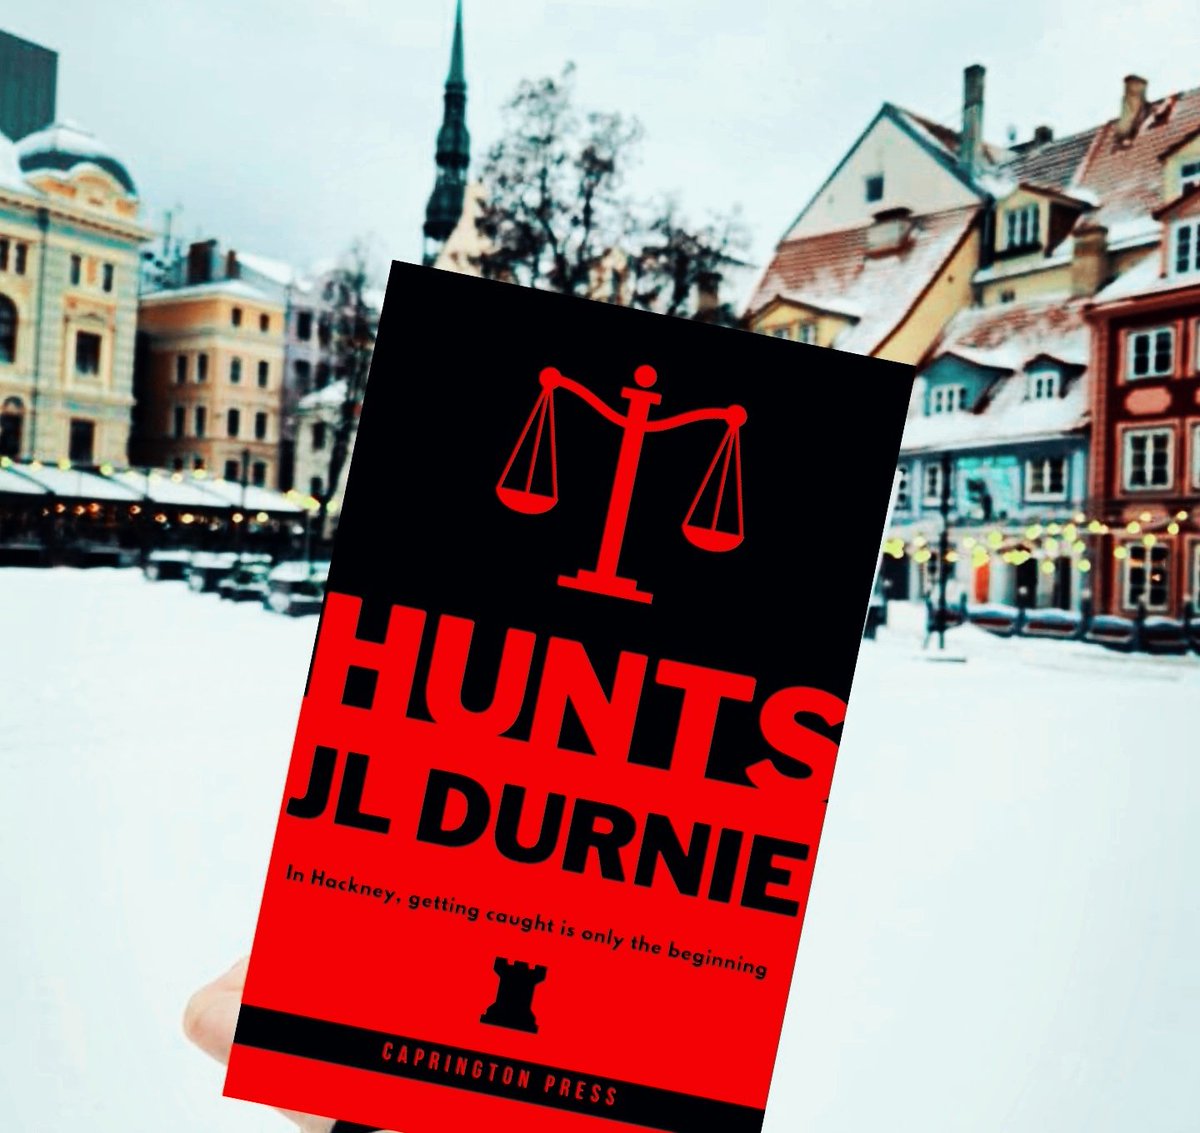 #ReadingInRiga #Hunts Crime Fiction - 1980s Hackney Where the law and justice collide, with explosive results Special offer £1.99 At that price, it’s a crime not to buy it… Kindle/Ebook now available at Amazon for £1.99 amzn.to/3sw6pKL #CrimeFiction